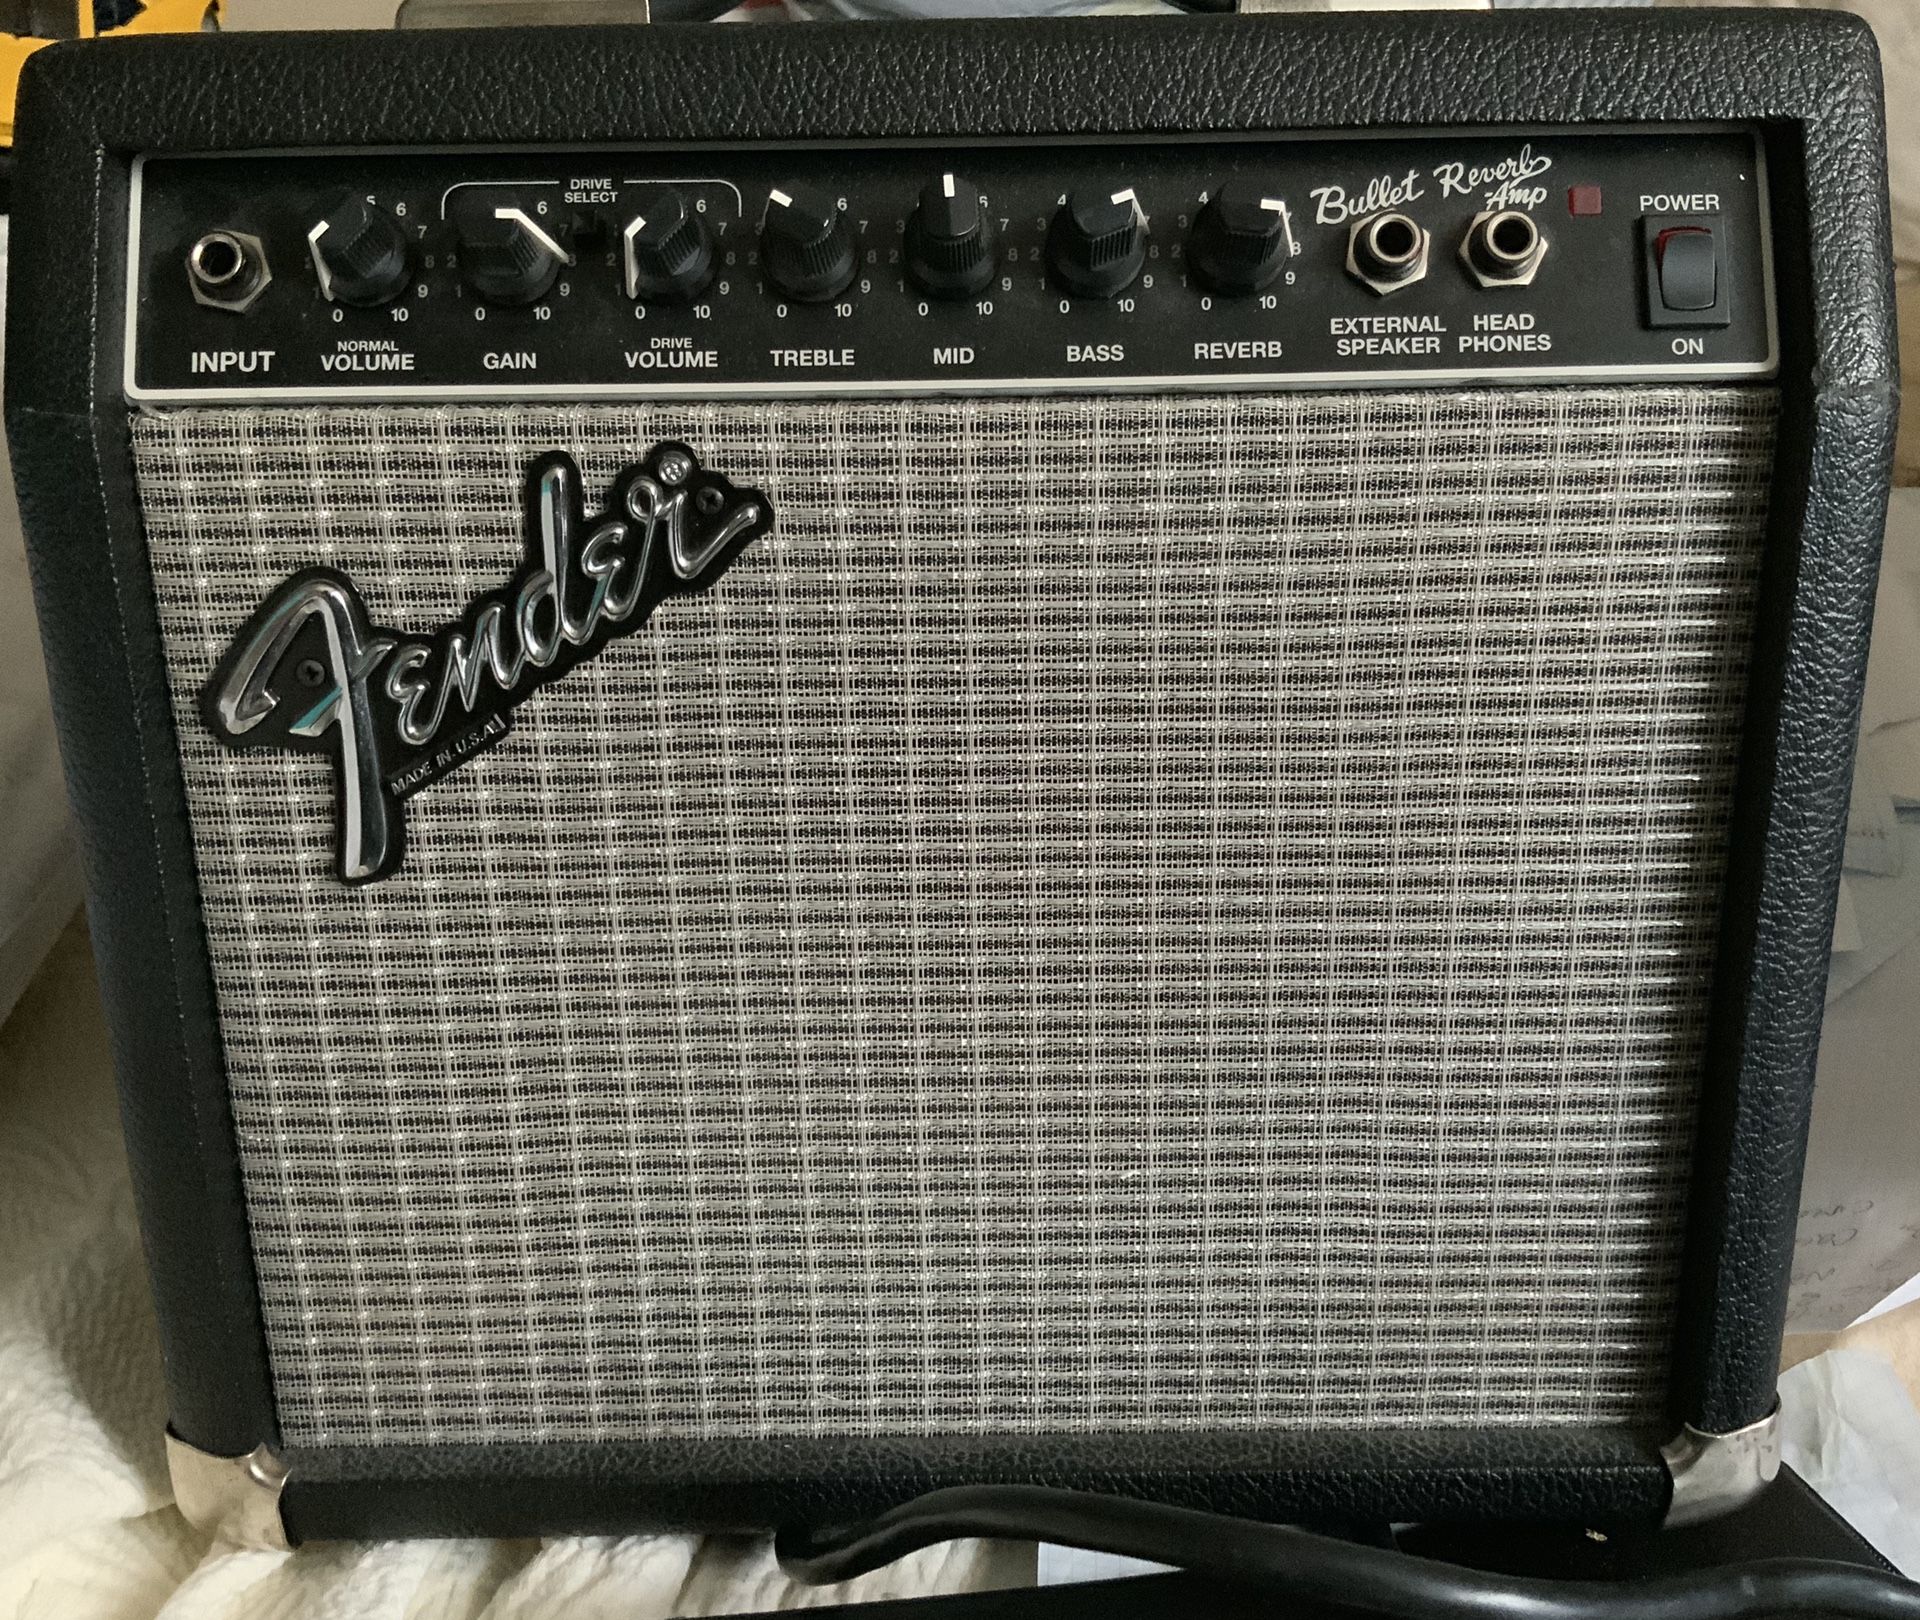 Fender Bullet reverb 2-Channel 15-Watt 1x8" Guitar Amp 1994 - 1998 made in the usa, real spring reverb Amplifier